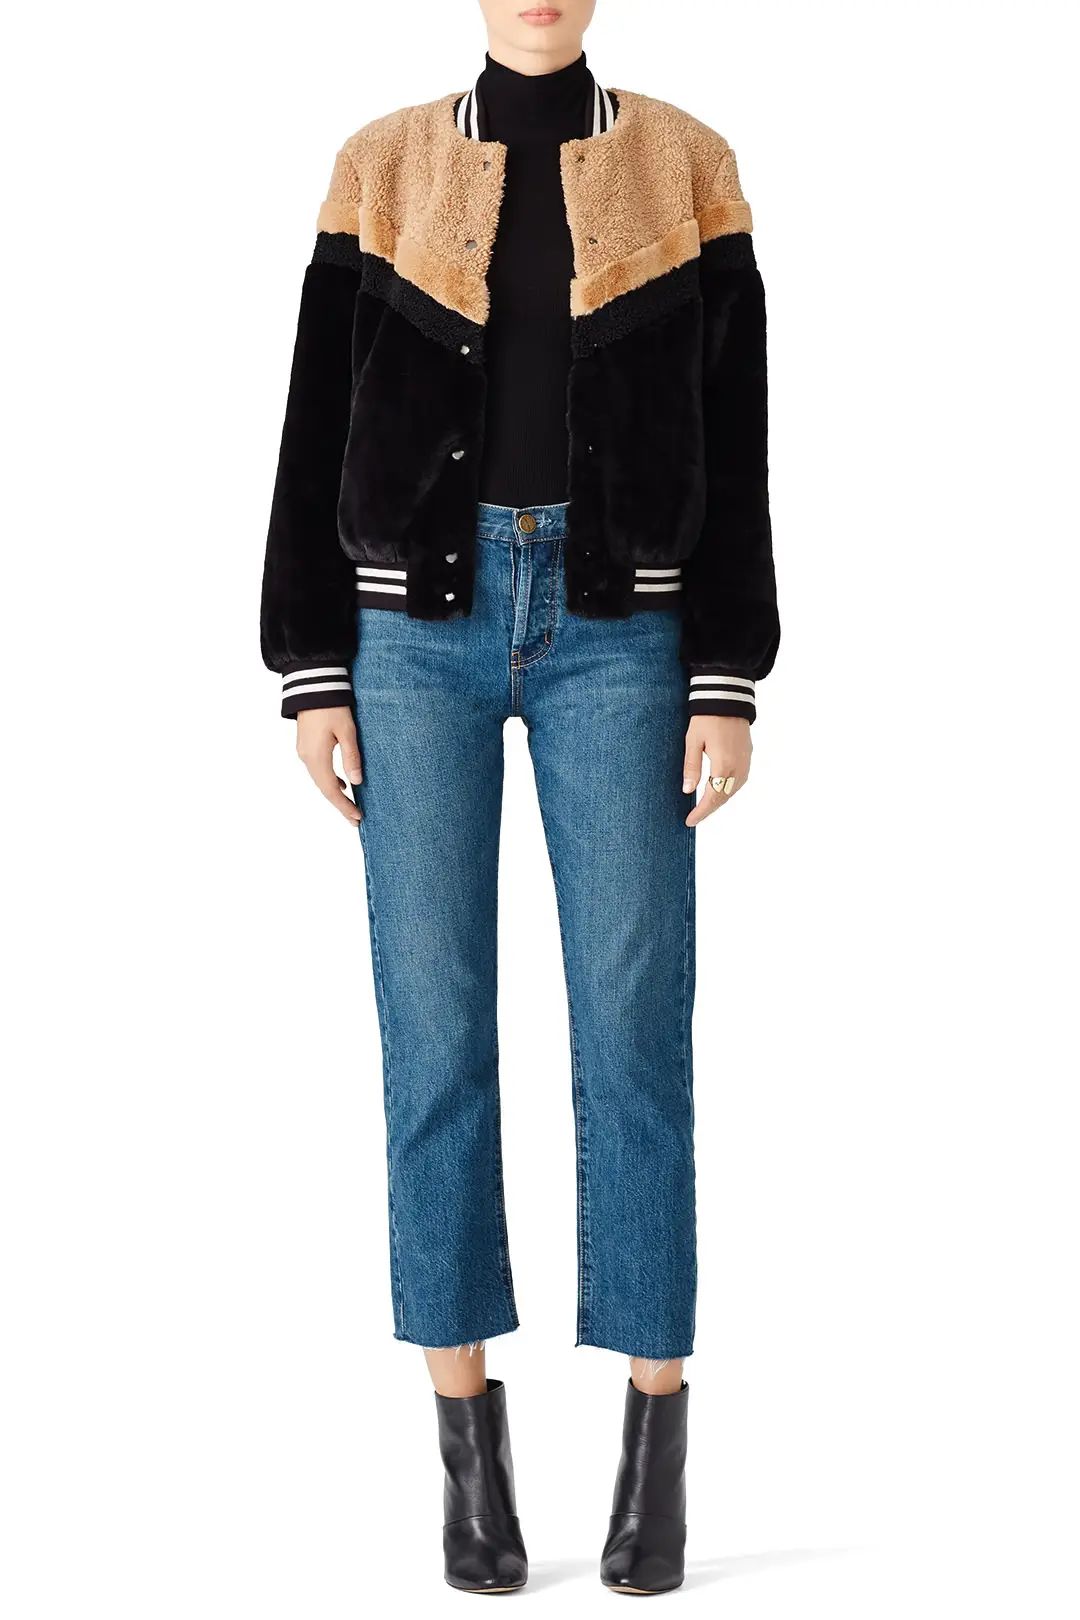 Free People Mixed Faux Fur Bomber | Rent The Runway